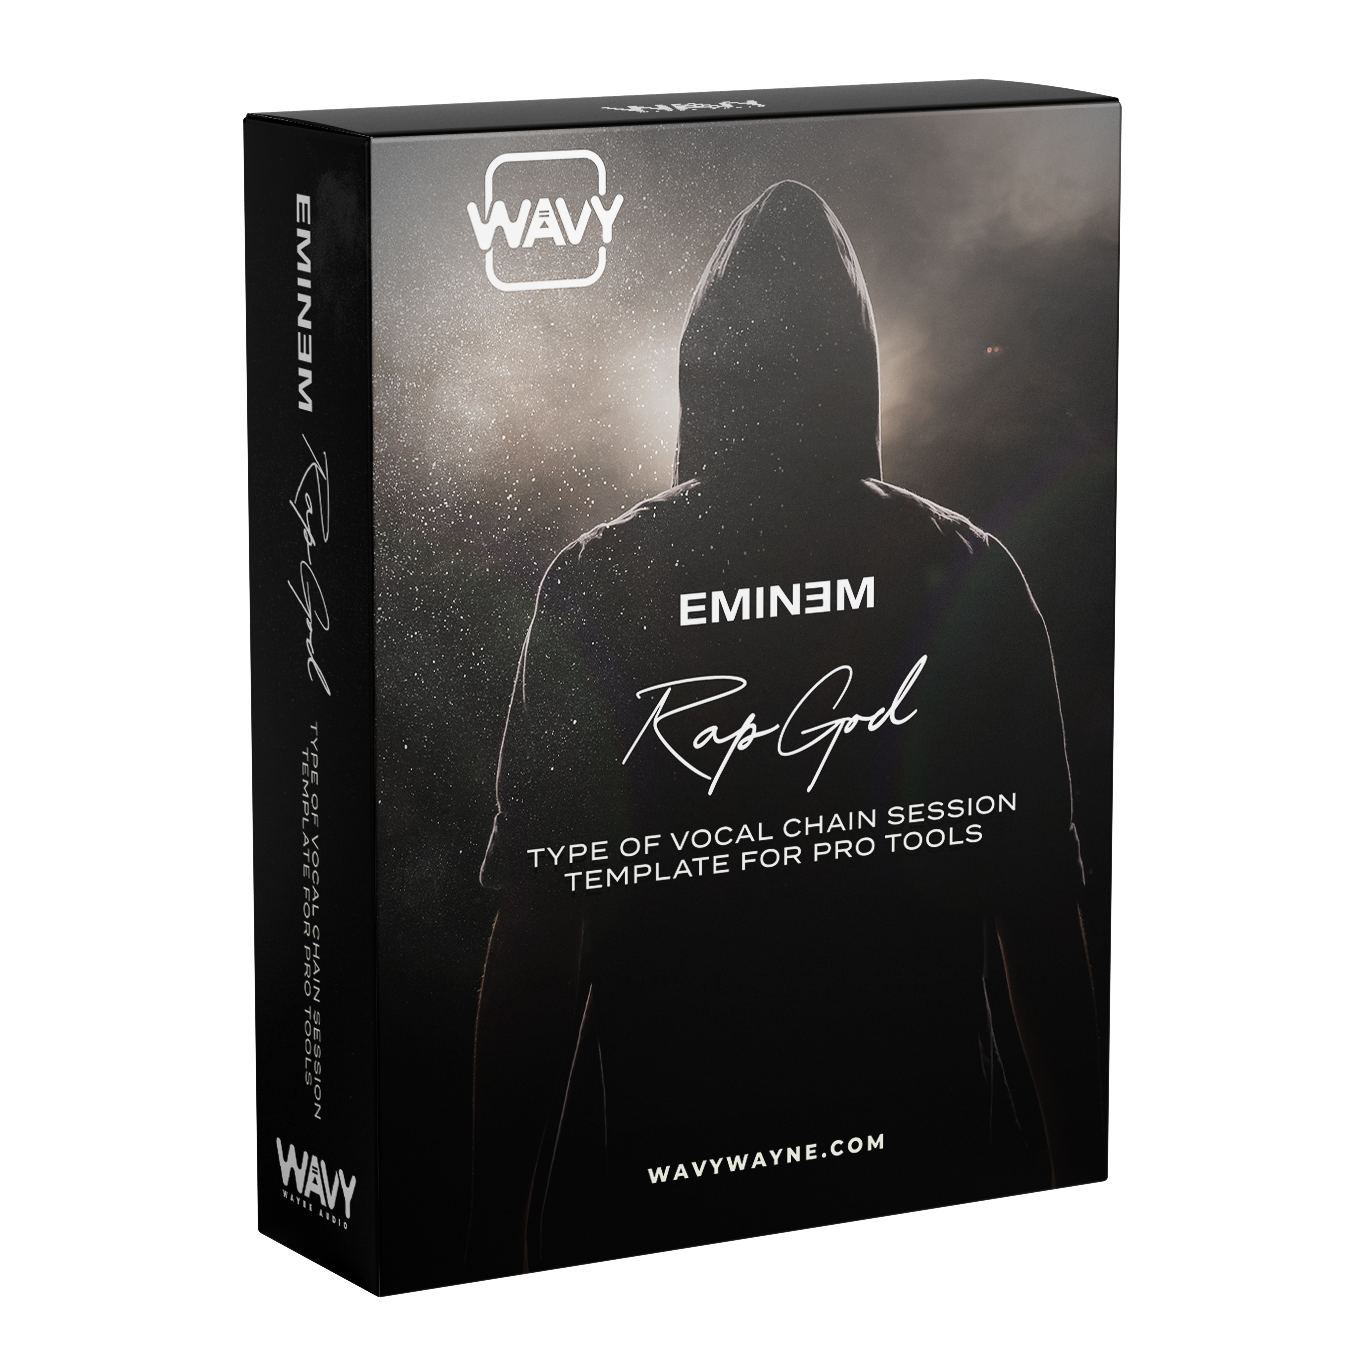 Eminem Rap God Type of Vocal Chain Session Template for Pro Tools